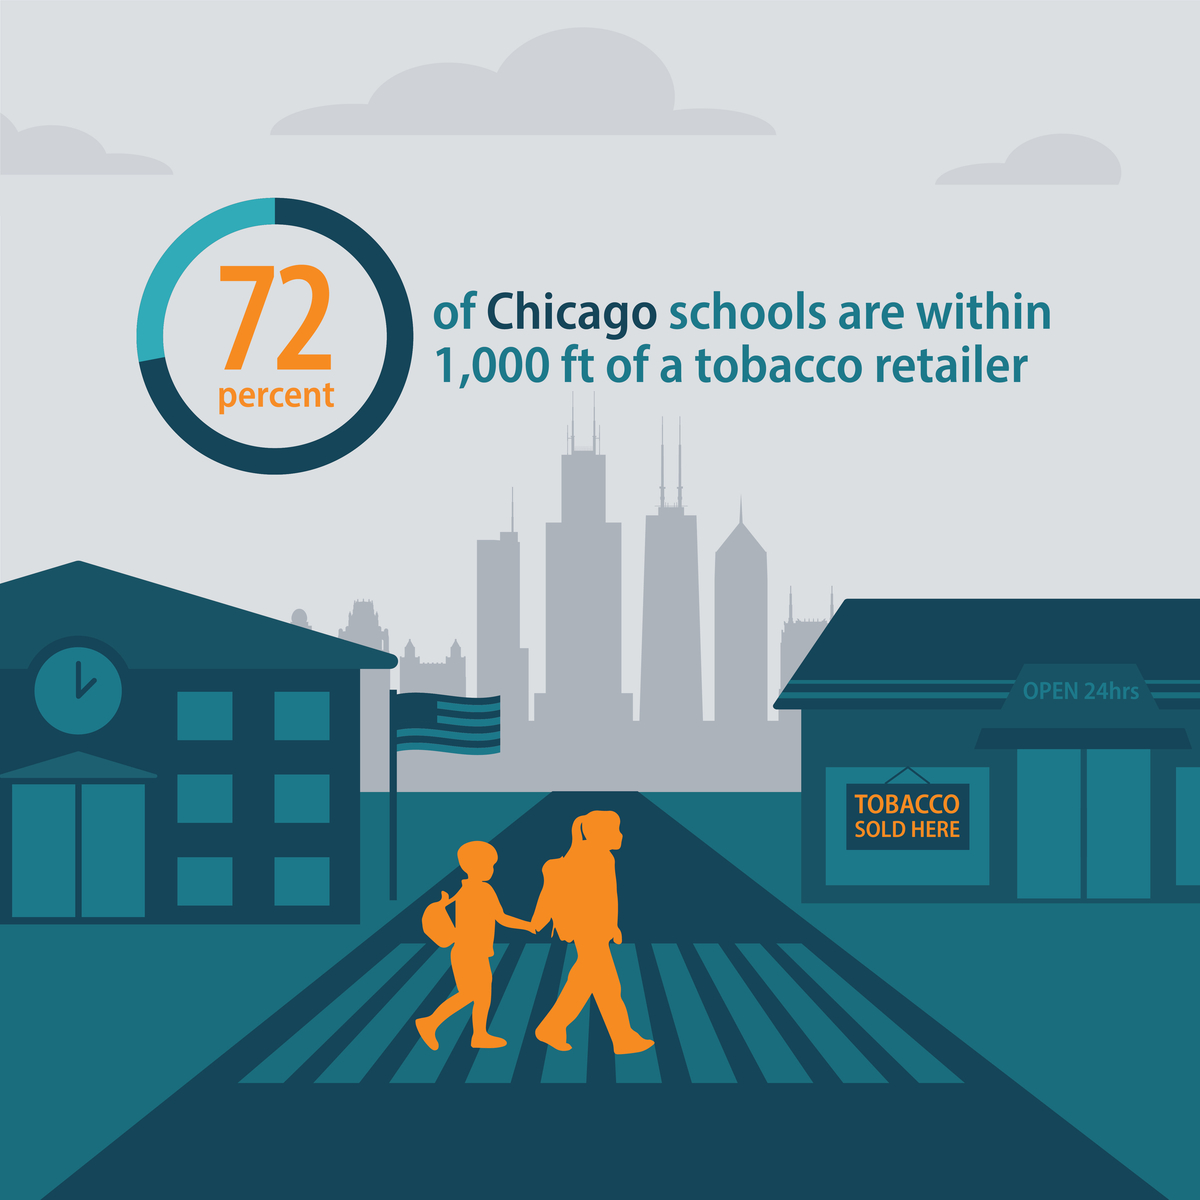 72 percent of Chicago schools are within 1,000 feet of a tobacco retailer